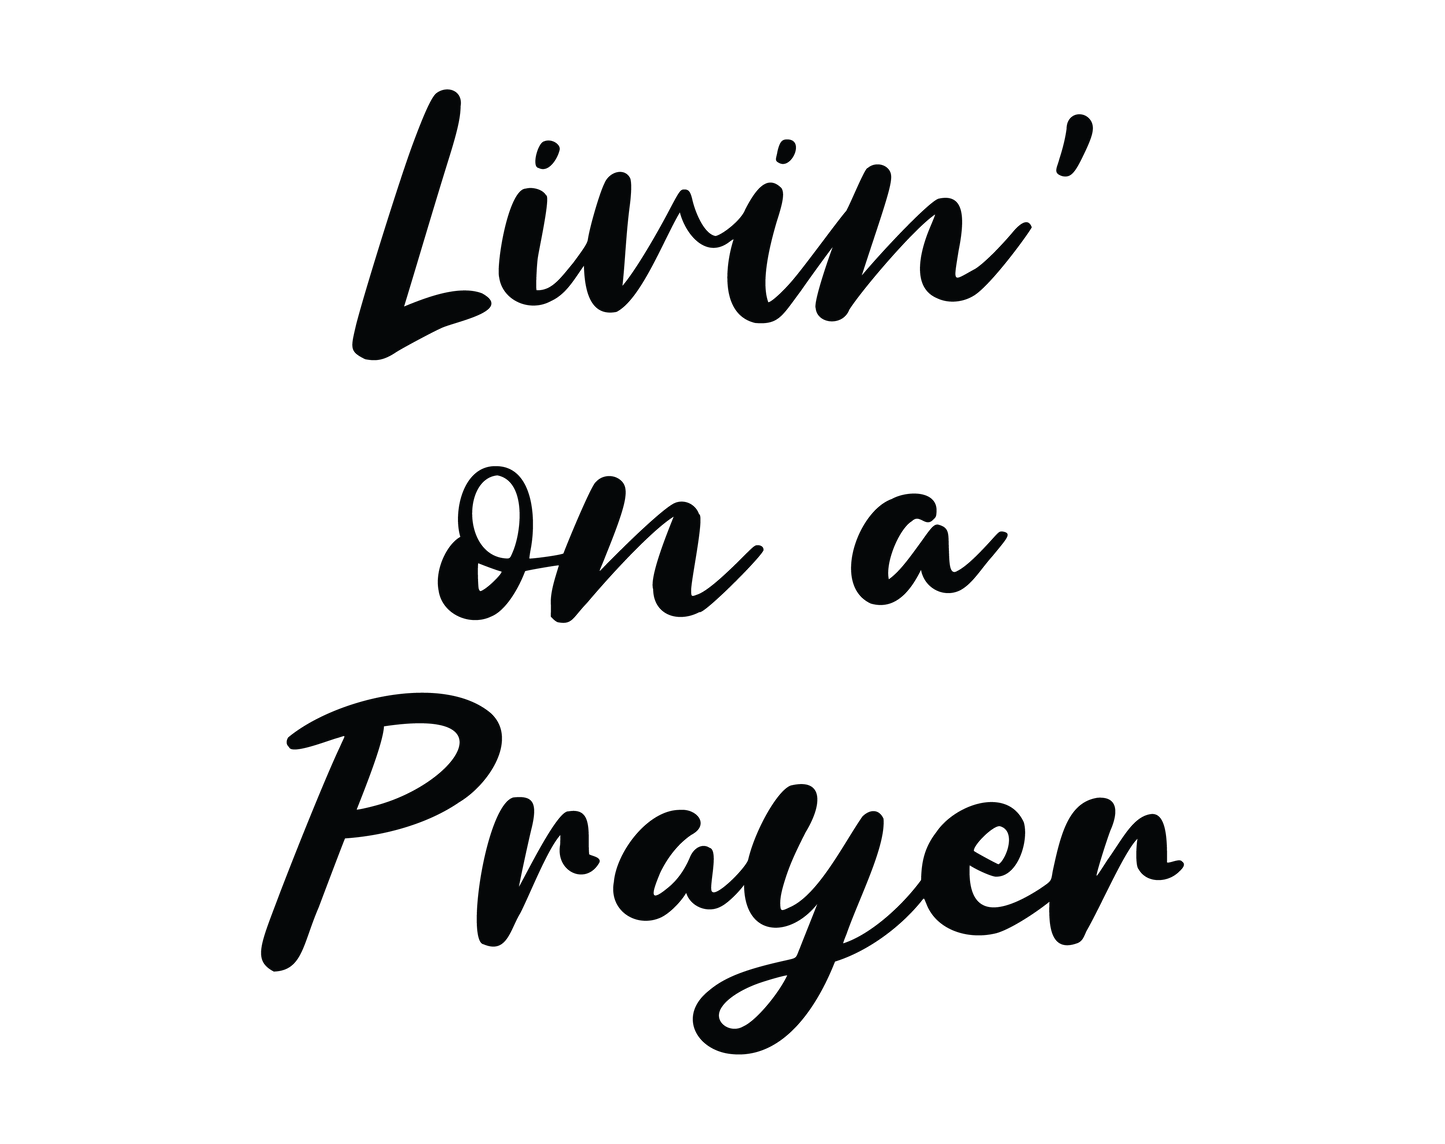 Livin' on a Prayer Vinyl Graphic for Decals